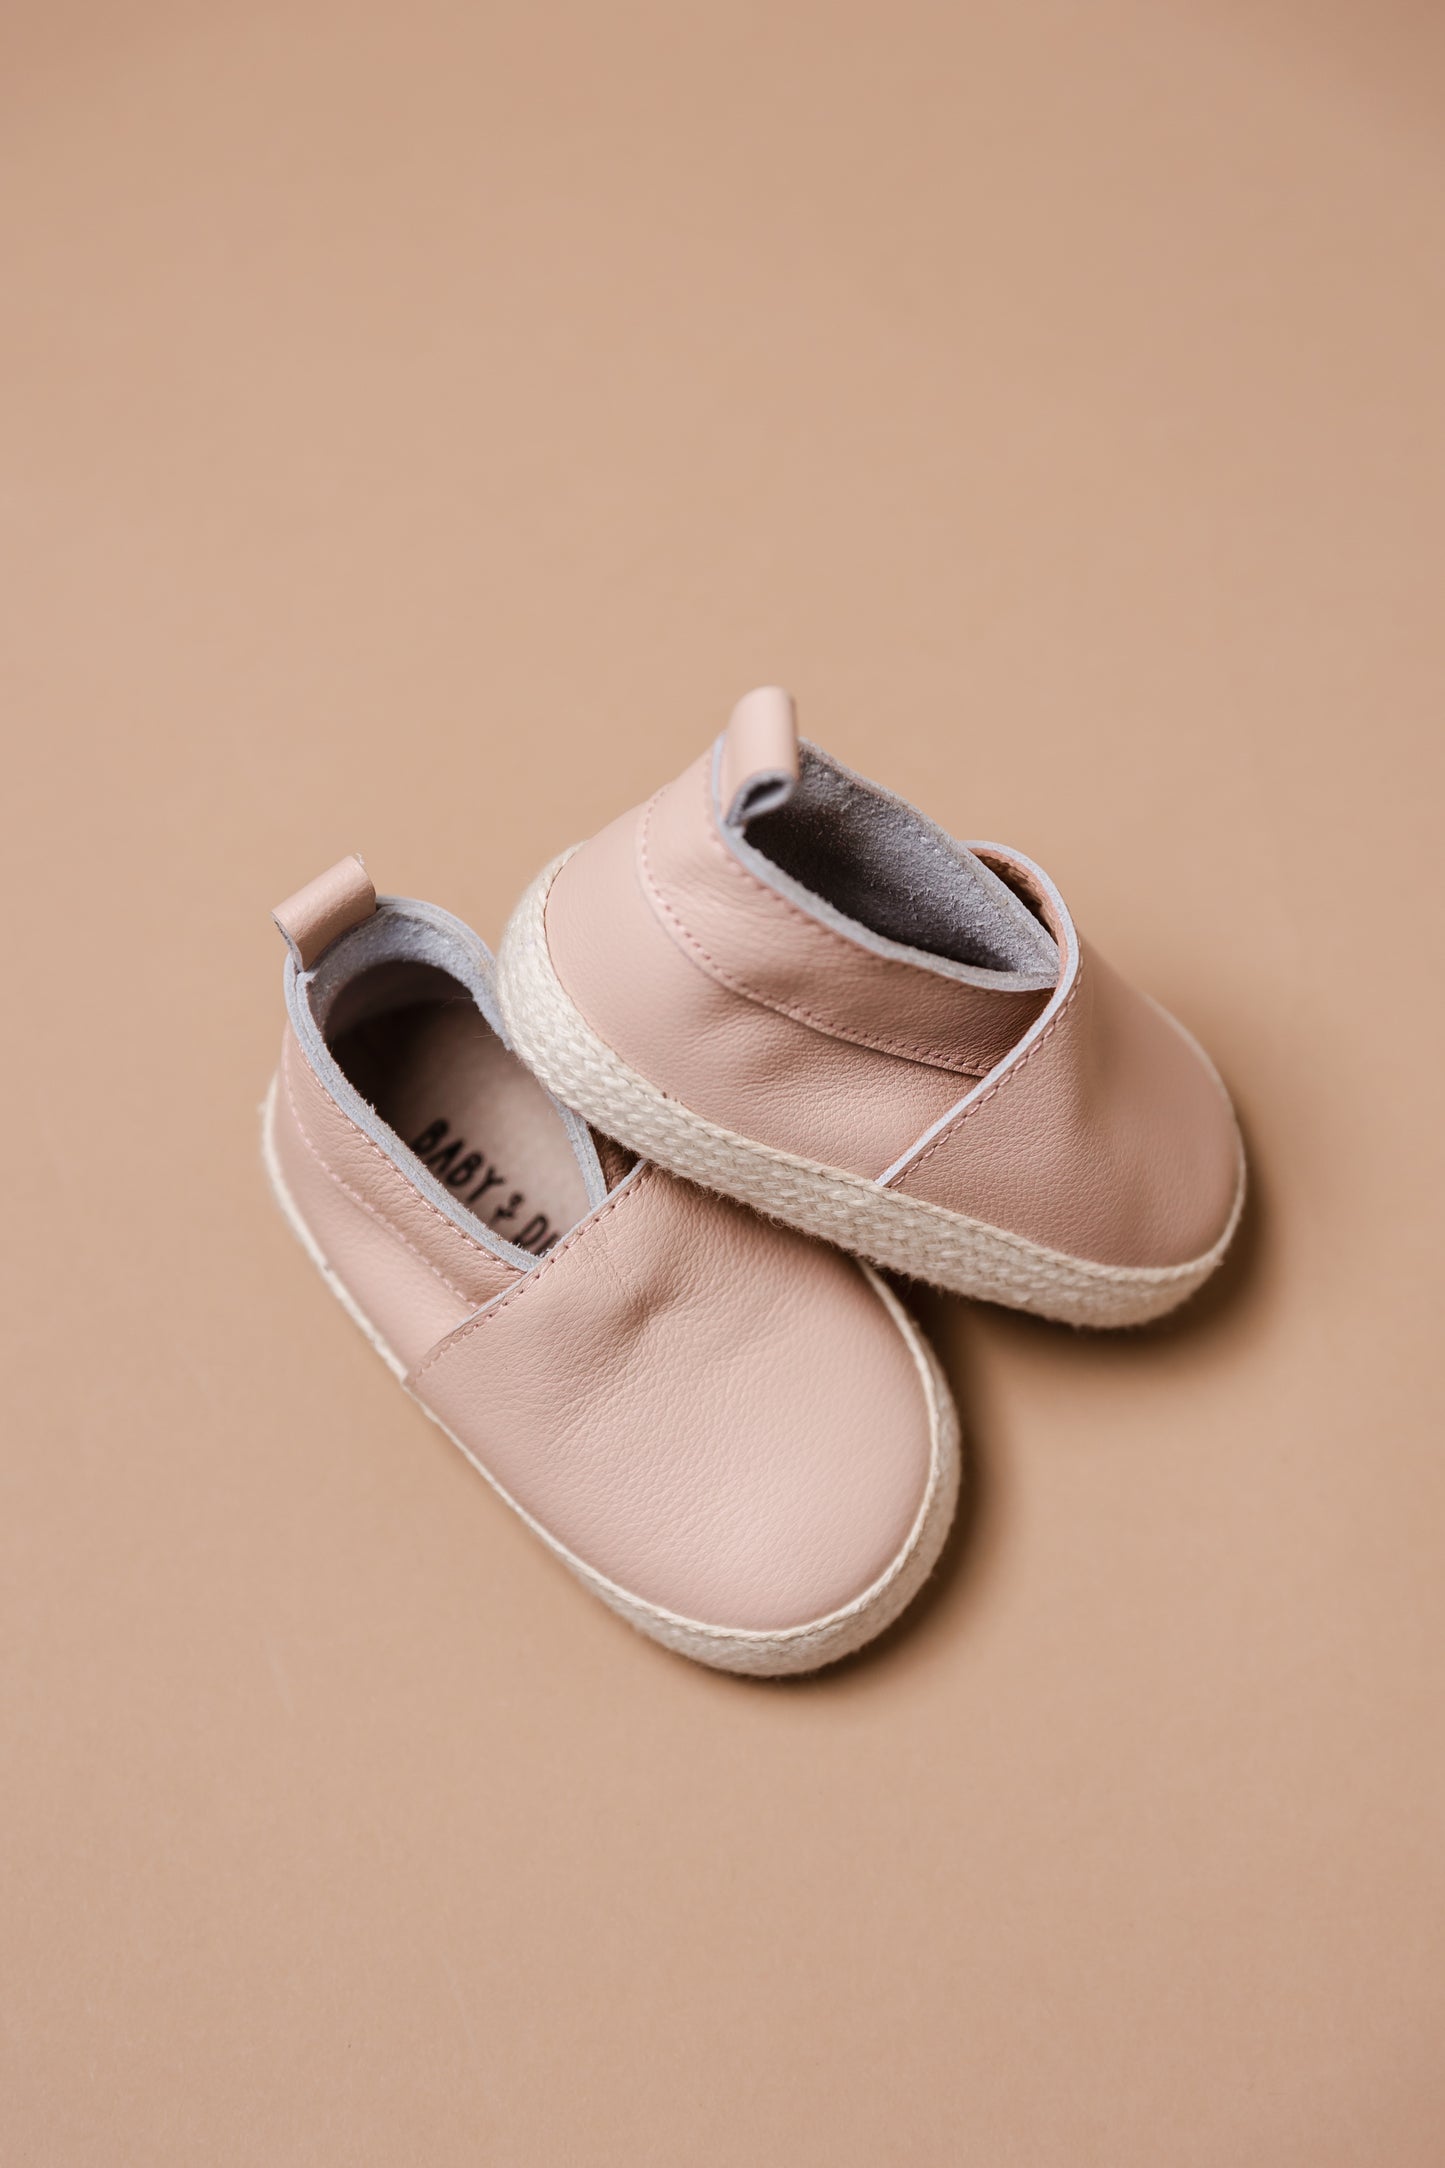 Lou | Babyshoes |  Pink leather